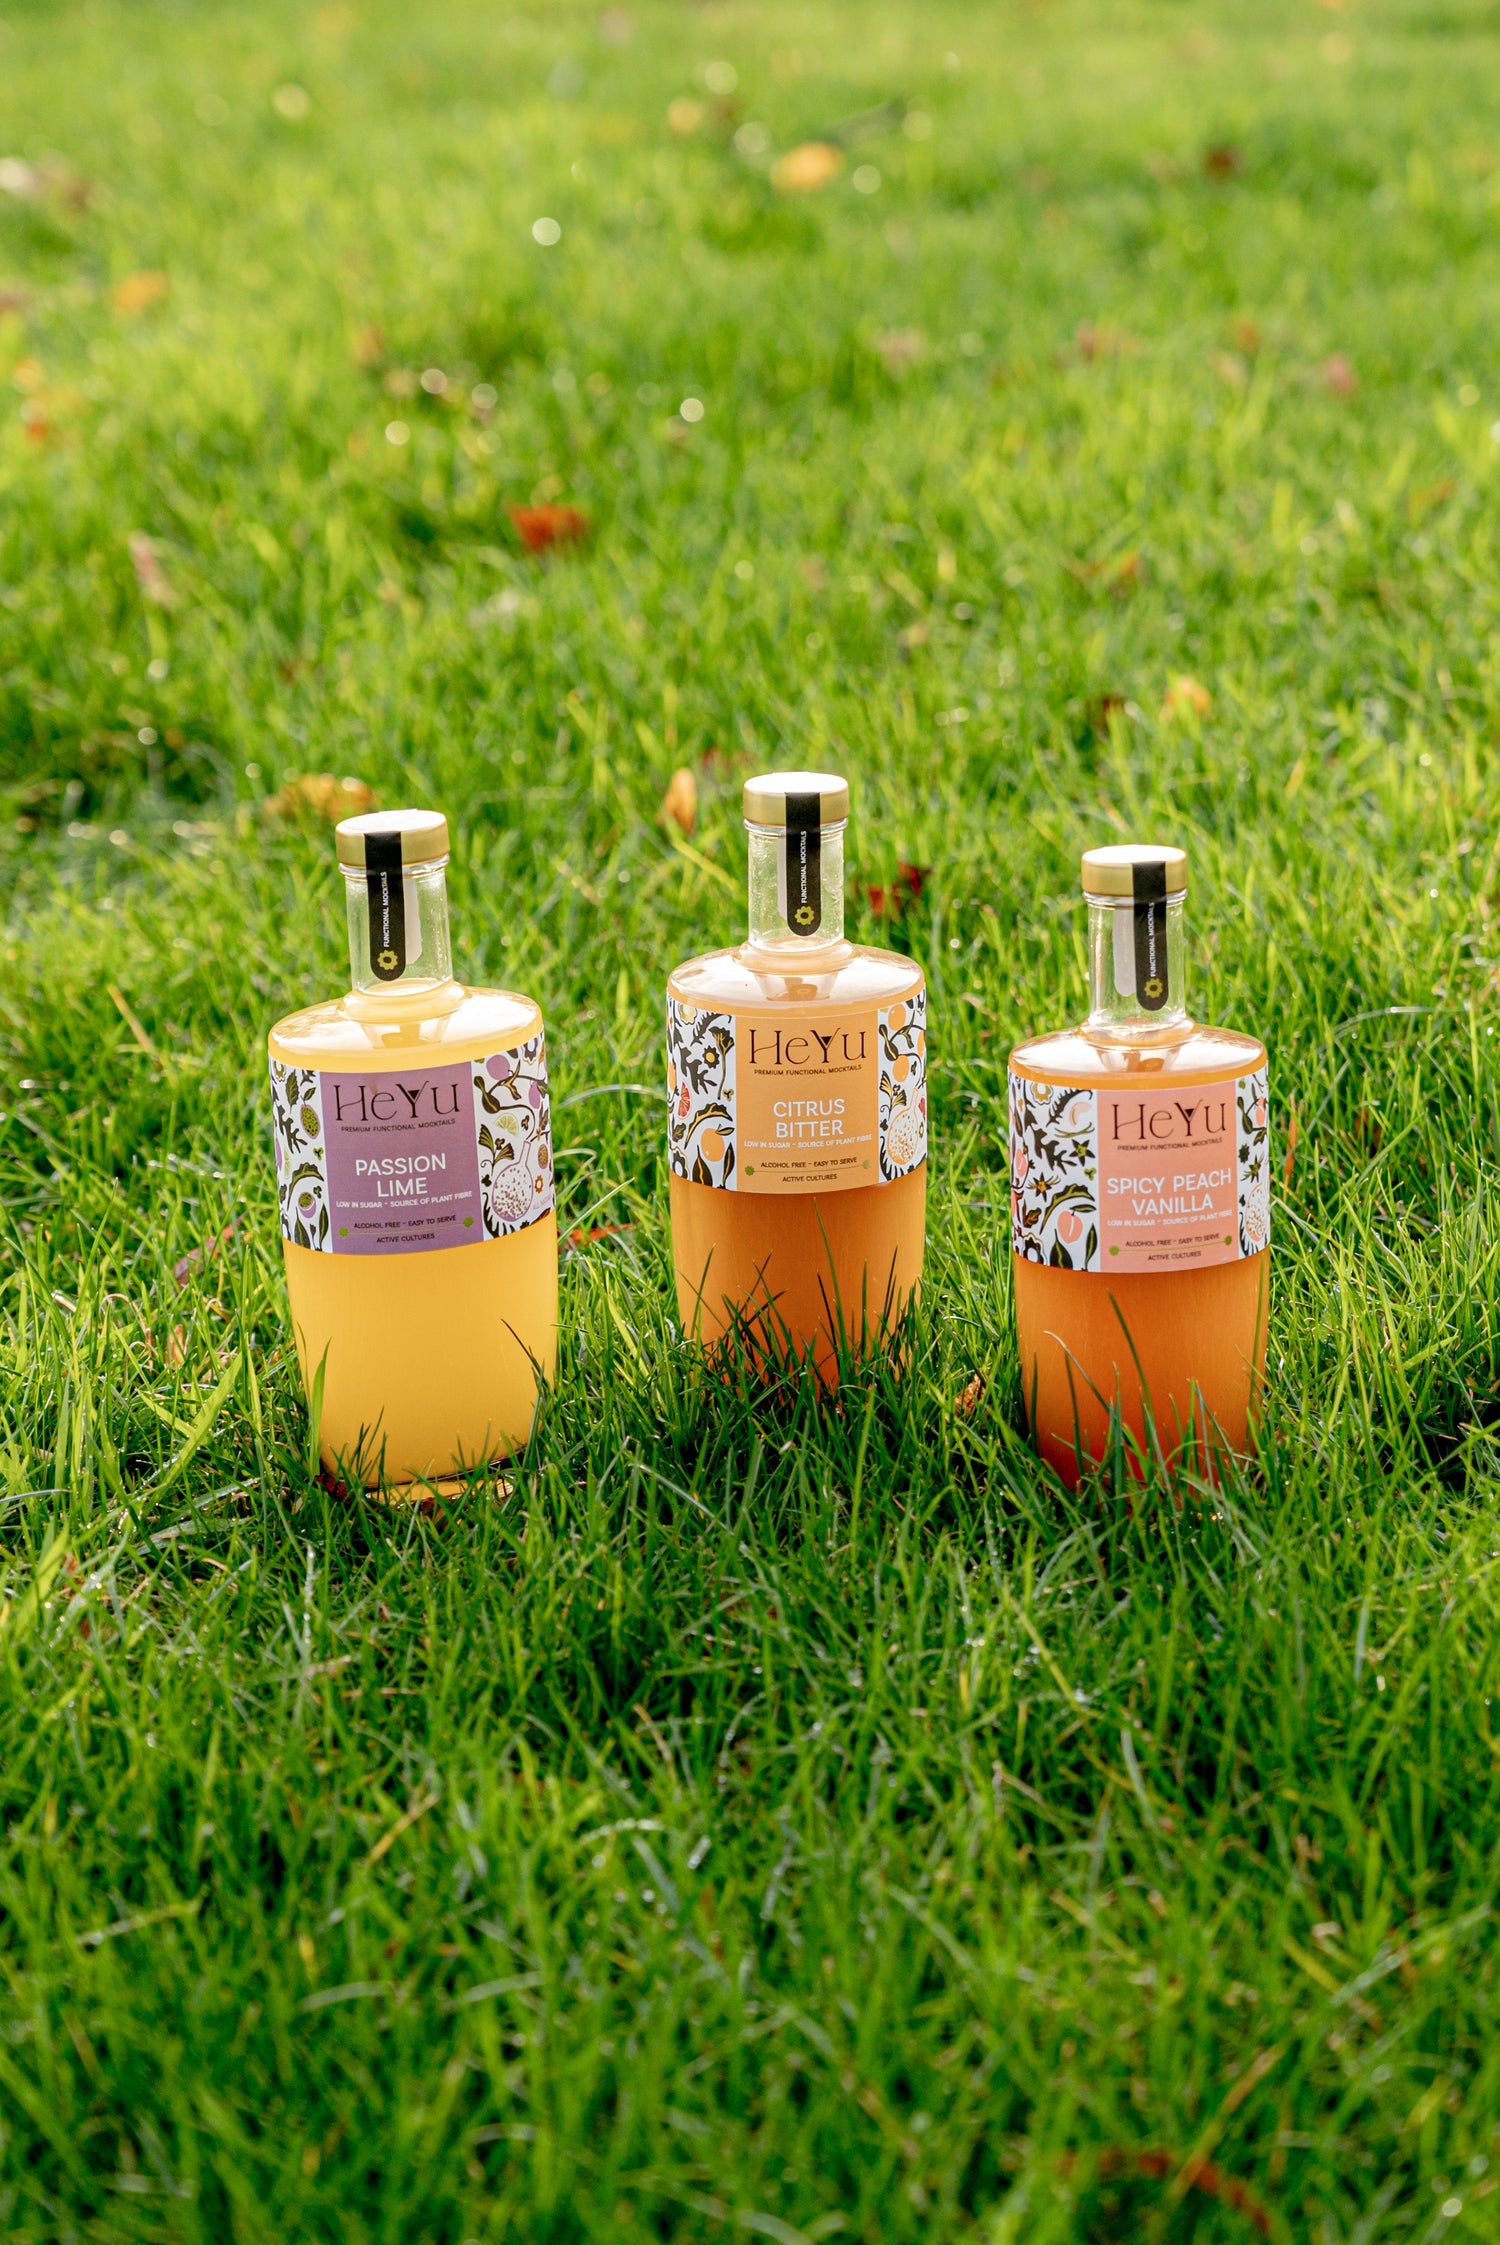 Picture of three Heyu mocktails bottles on a grass field